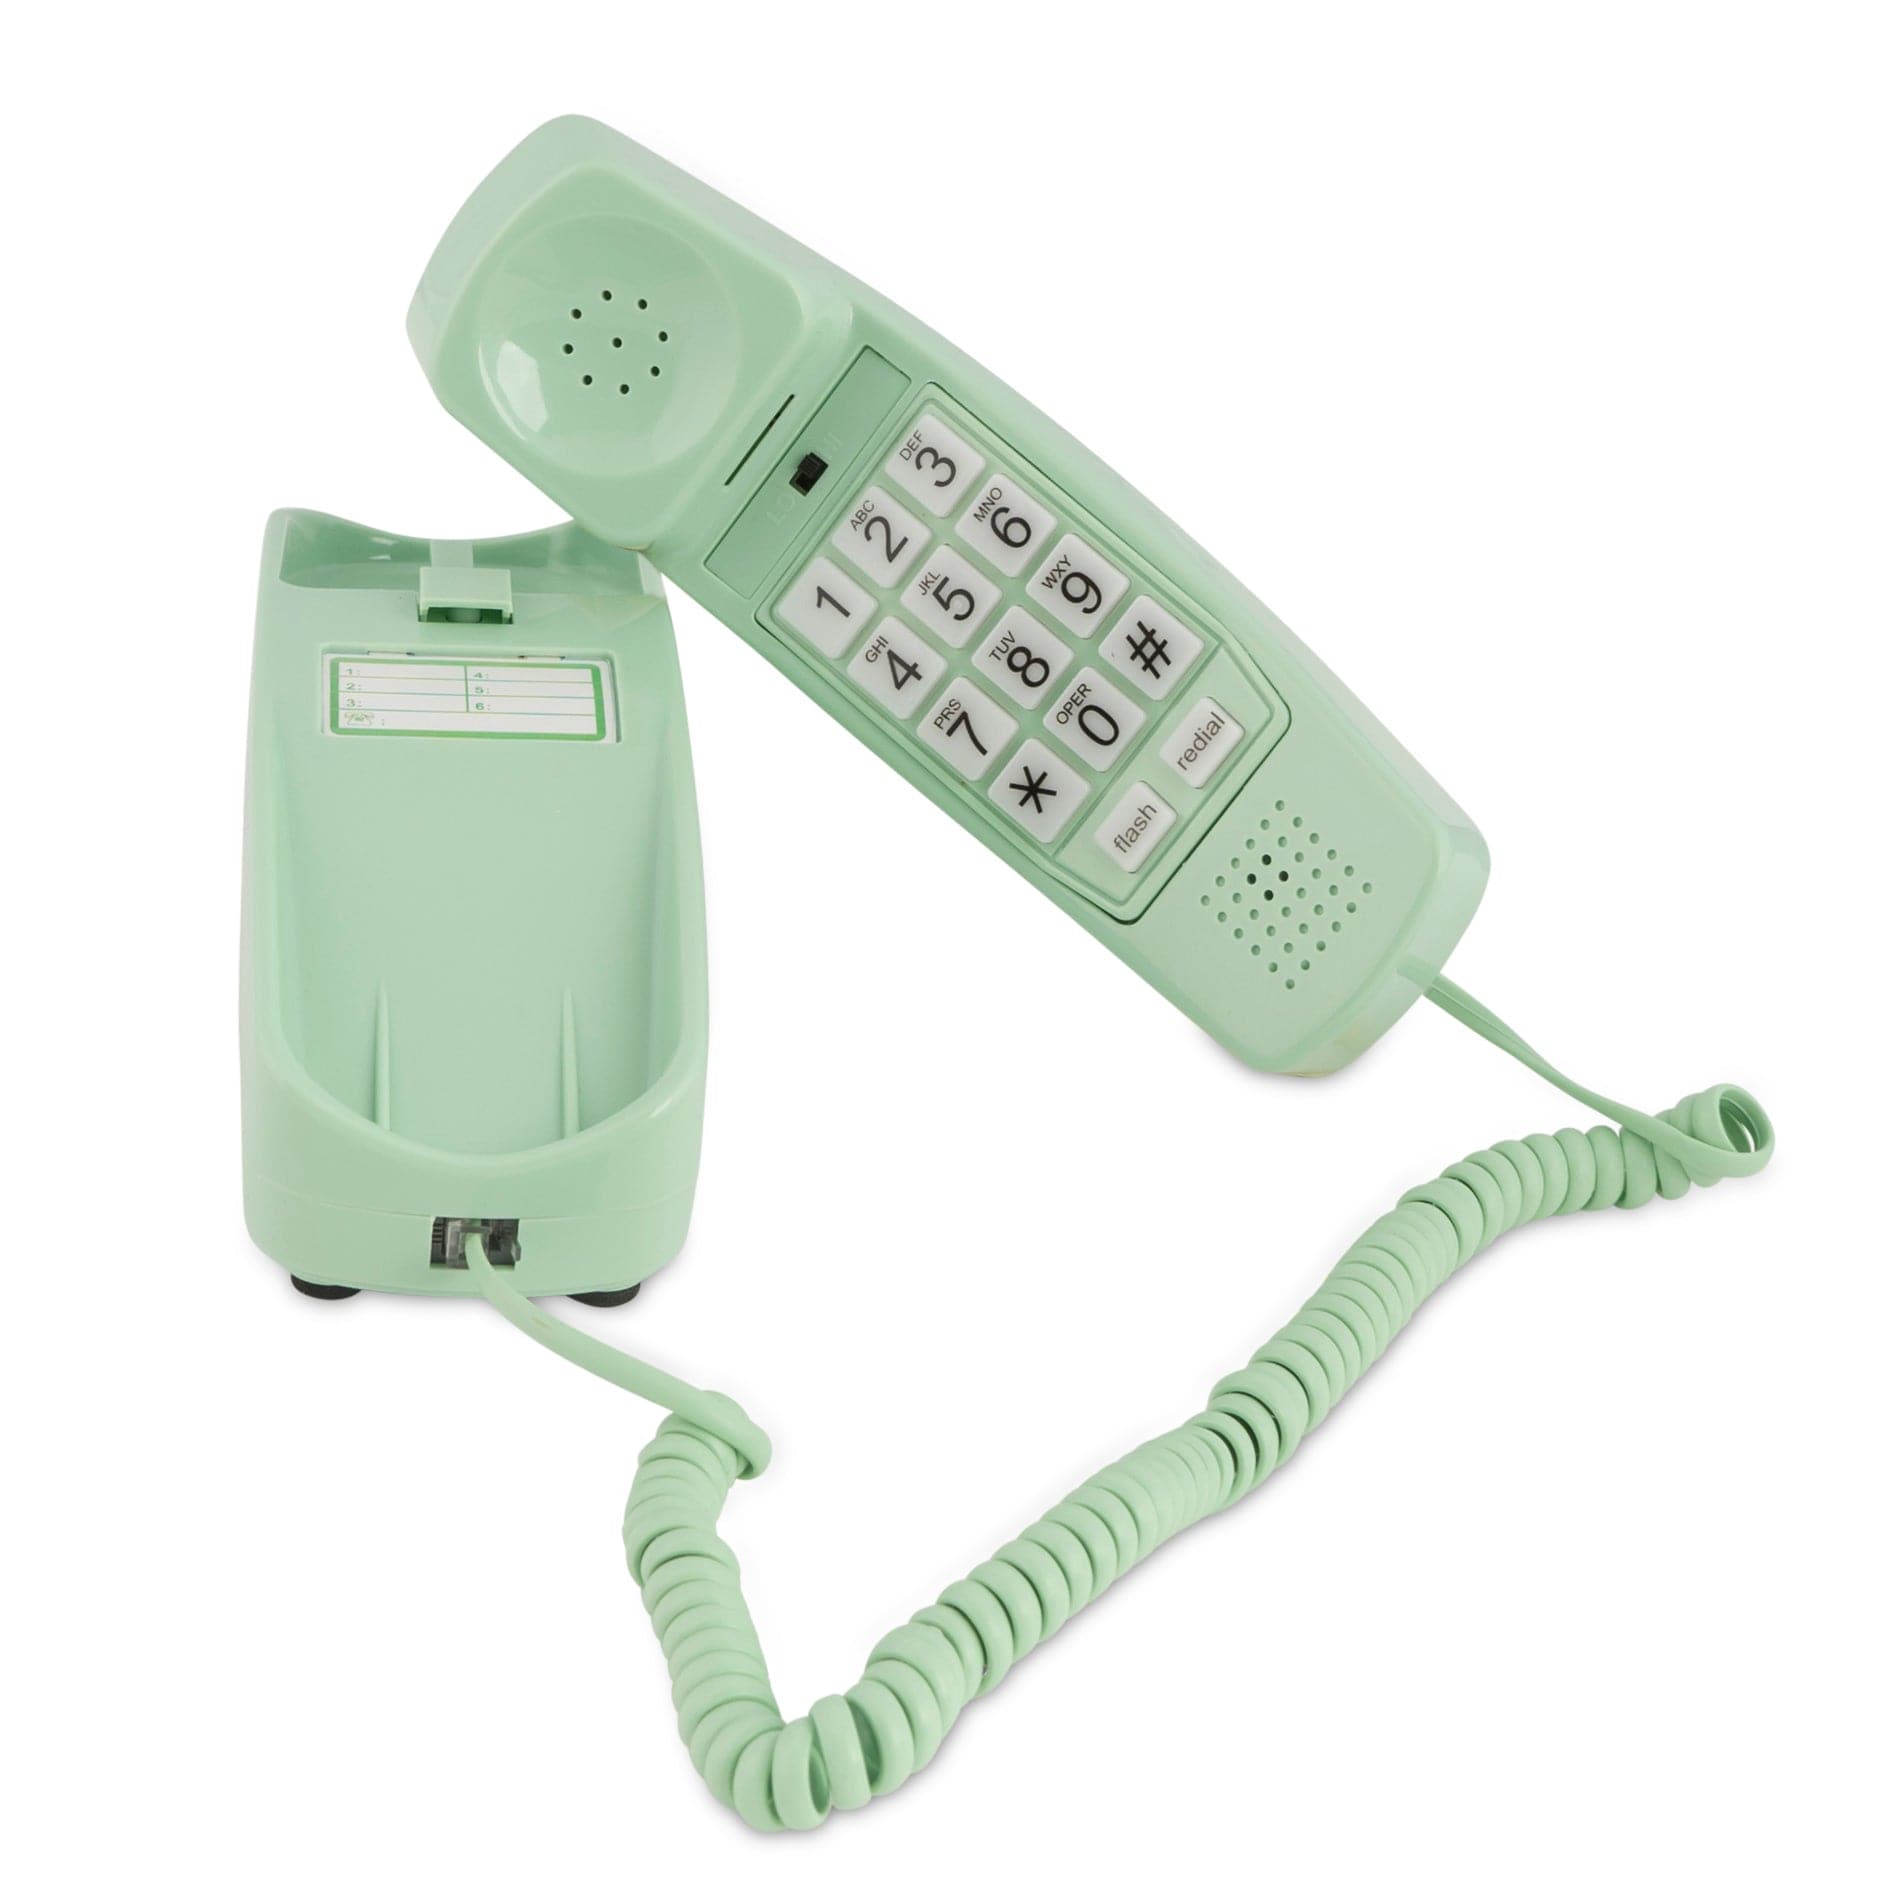 iSoHo Trimline Phone: Enhanced for Seniors, Visually Impaired. Large Buttons, Loud Ringer.Perfect for Hearing and Visually Impaired. Retro Style, Reliable Performance - Earth Day Green - USA Trading Depot, LLC